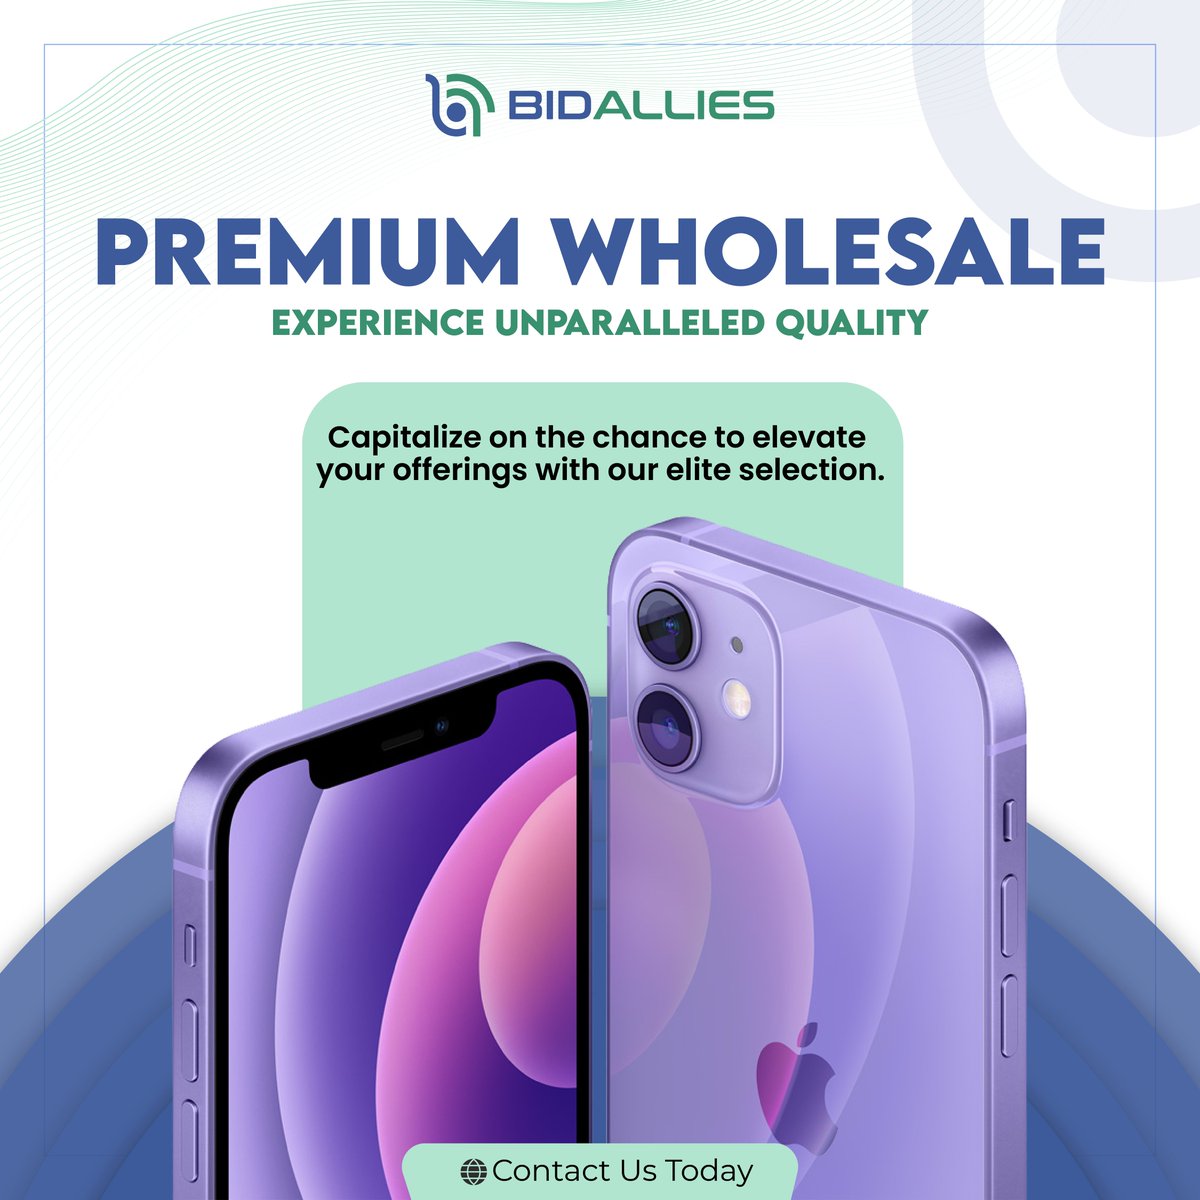 📱 Get top-grade iPhones ready to define your inventory! Quality assured, satisfaction guaranteed.
Bulk buys? We’ve got you. Superior performance? Absolutely. Tap the link to order from the best before it’s too late! #Wholesale #QualityTech #EliteSelection #iPhone12 #BulkDeals